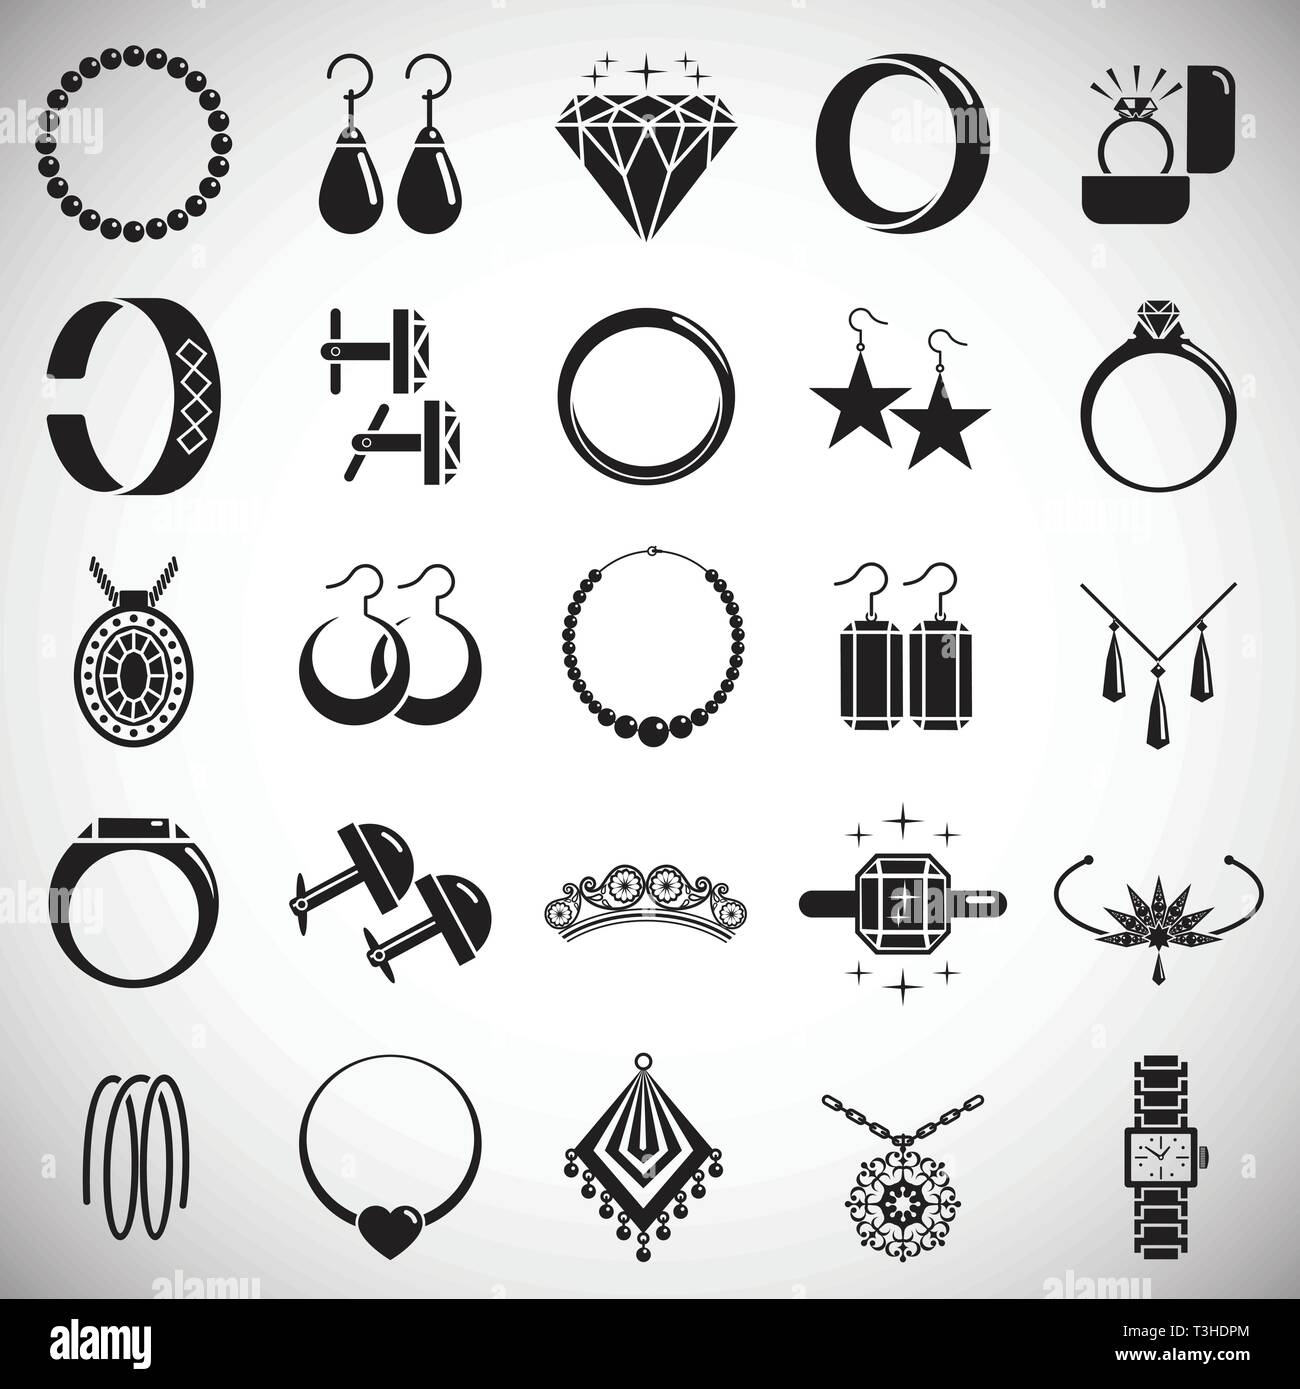 Jewelry icons set on white background for graphic and web design ...